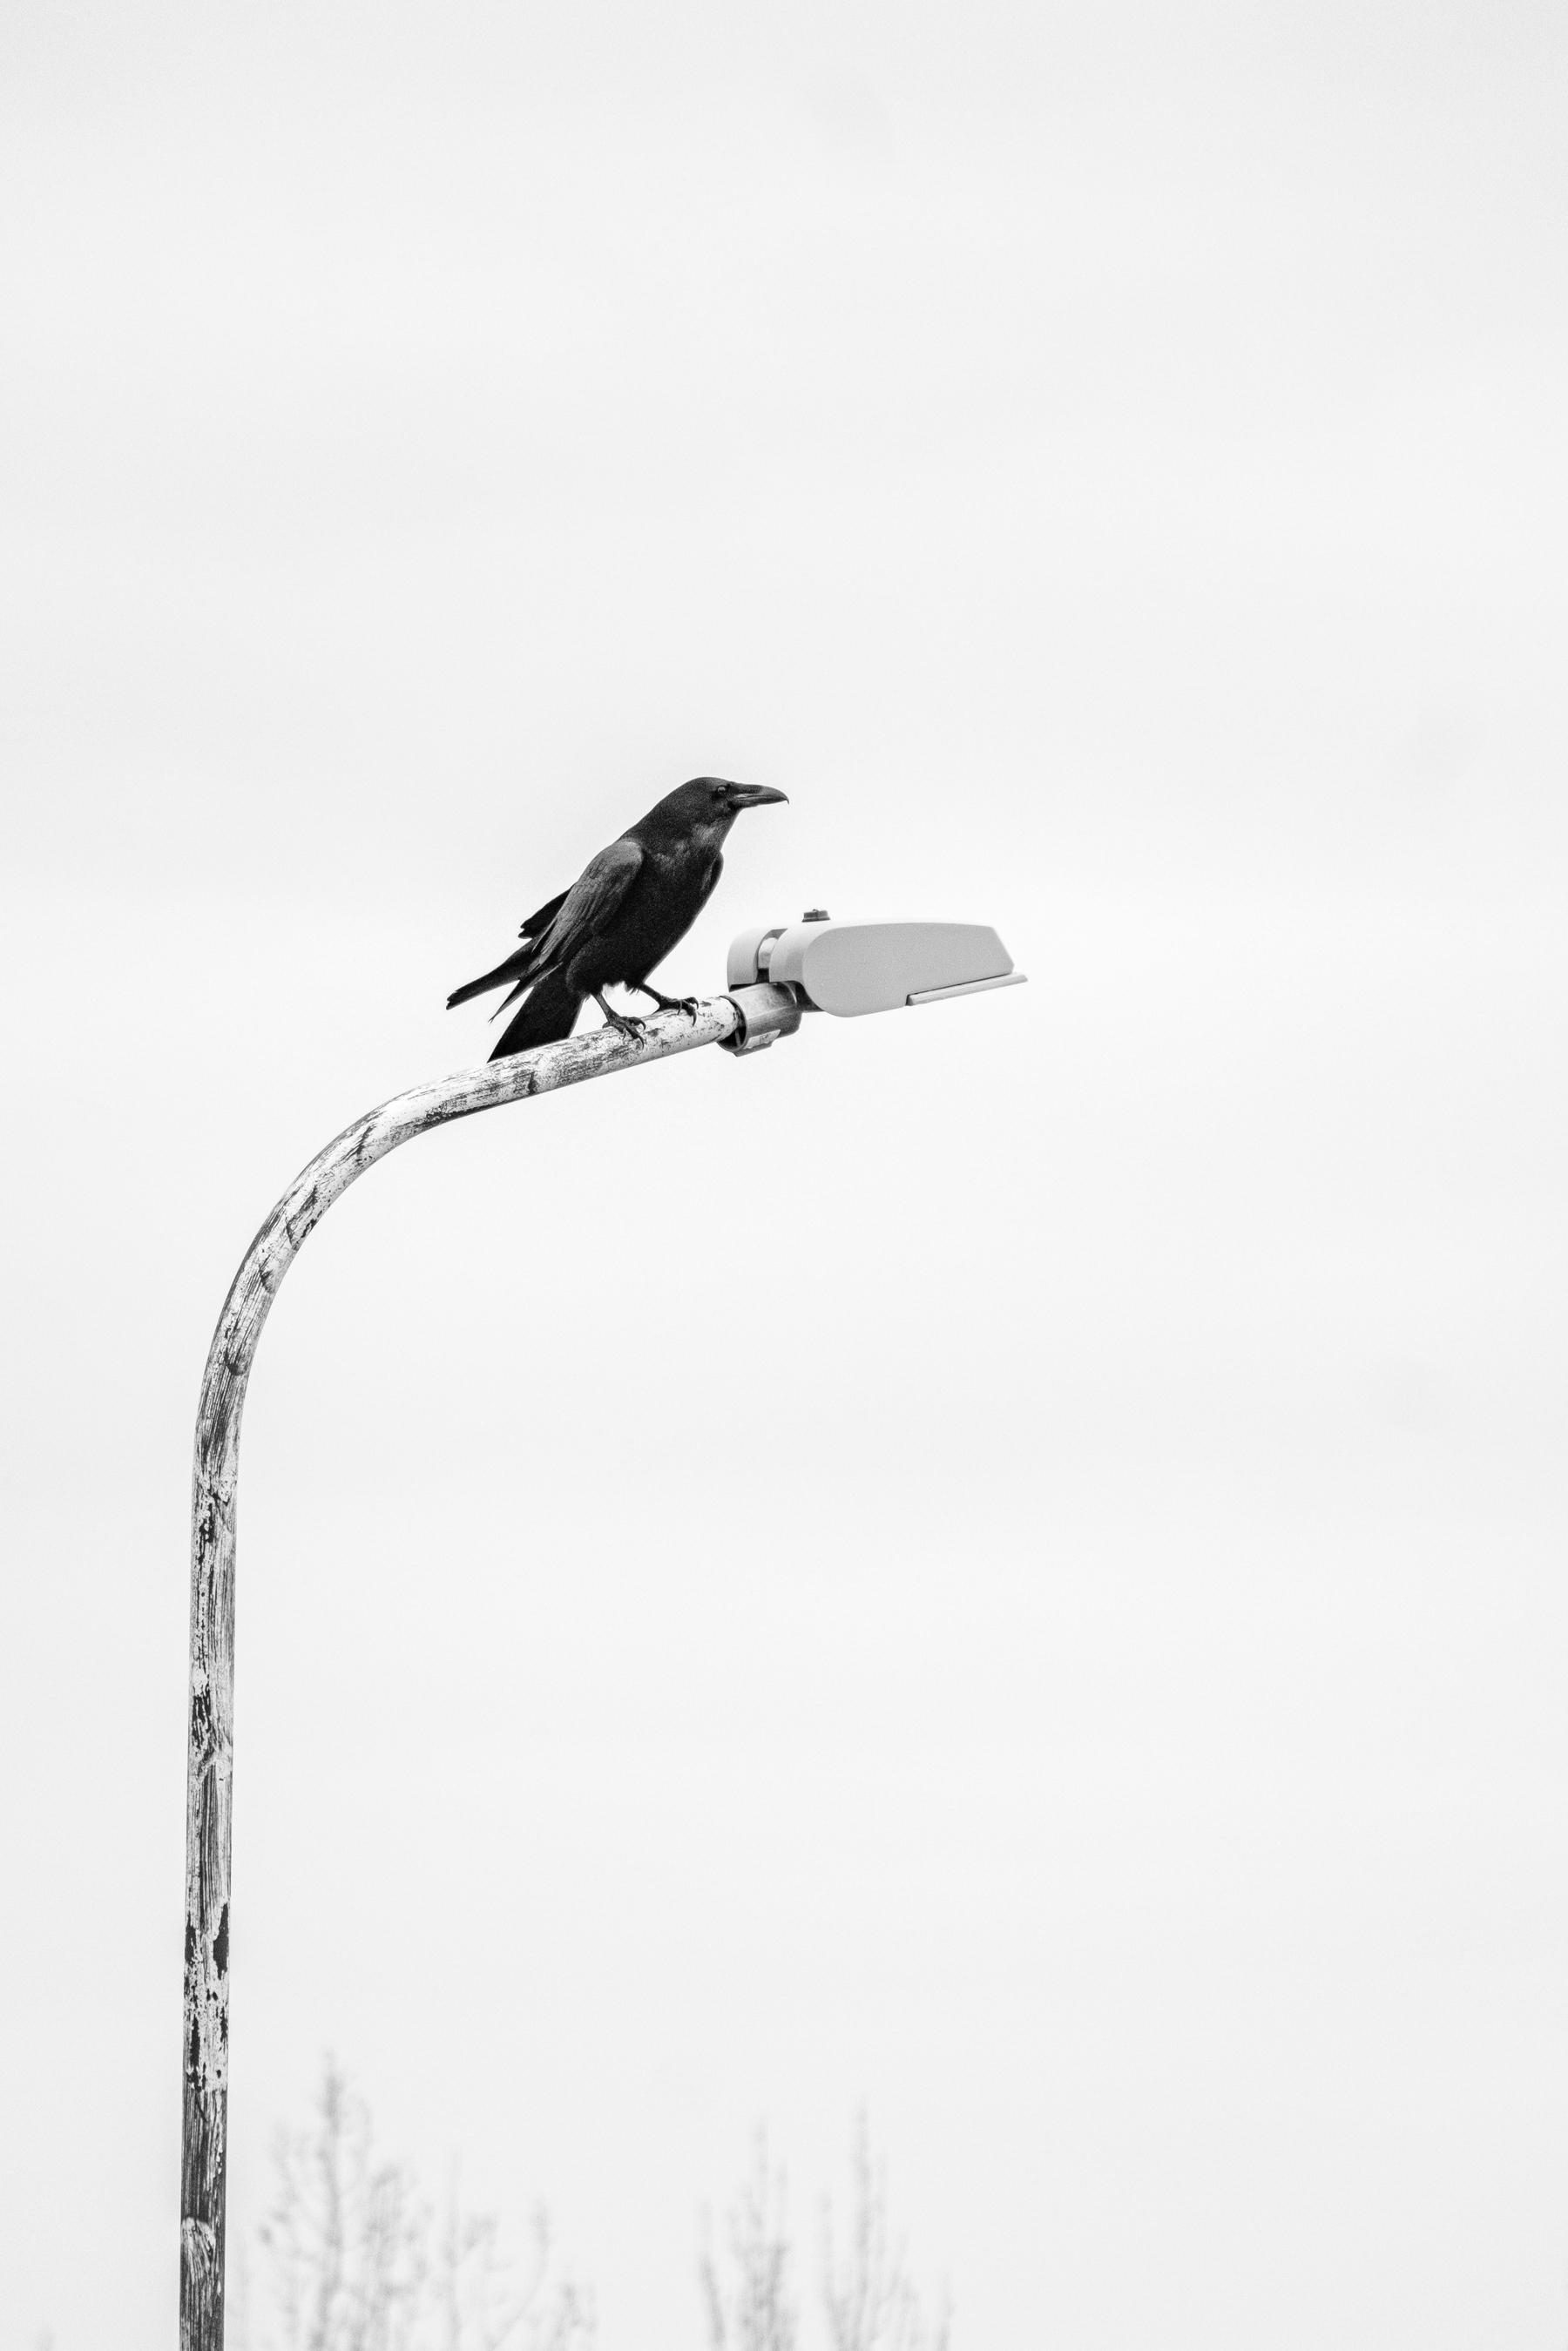 A raven walks up to the top of the streetlight.